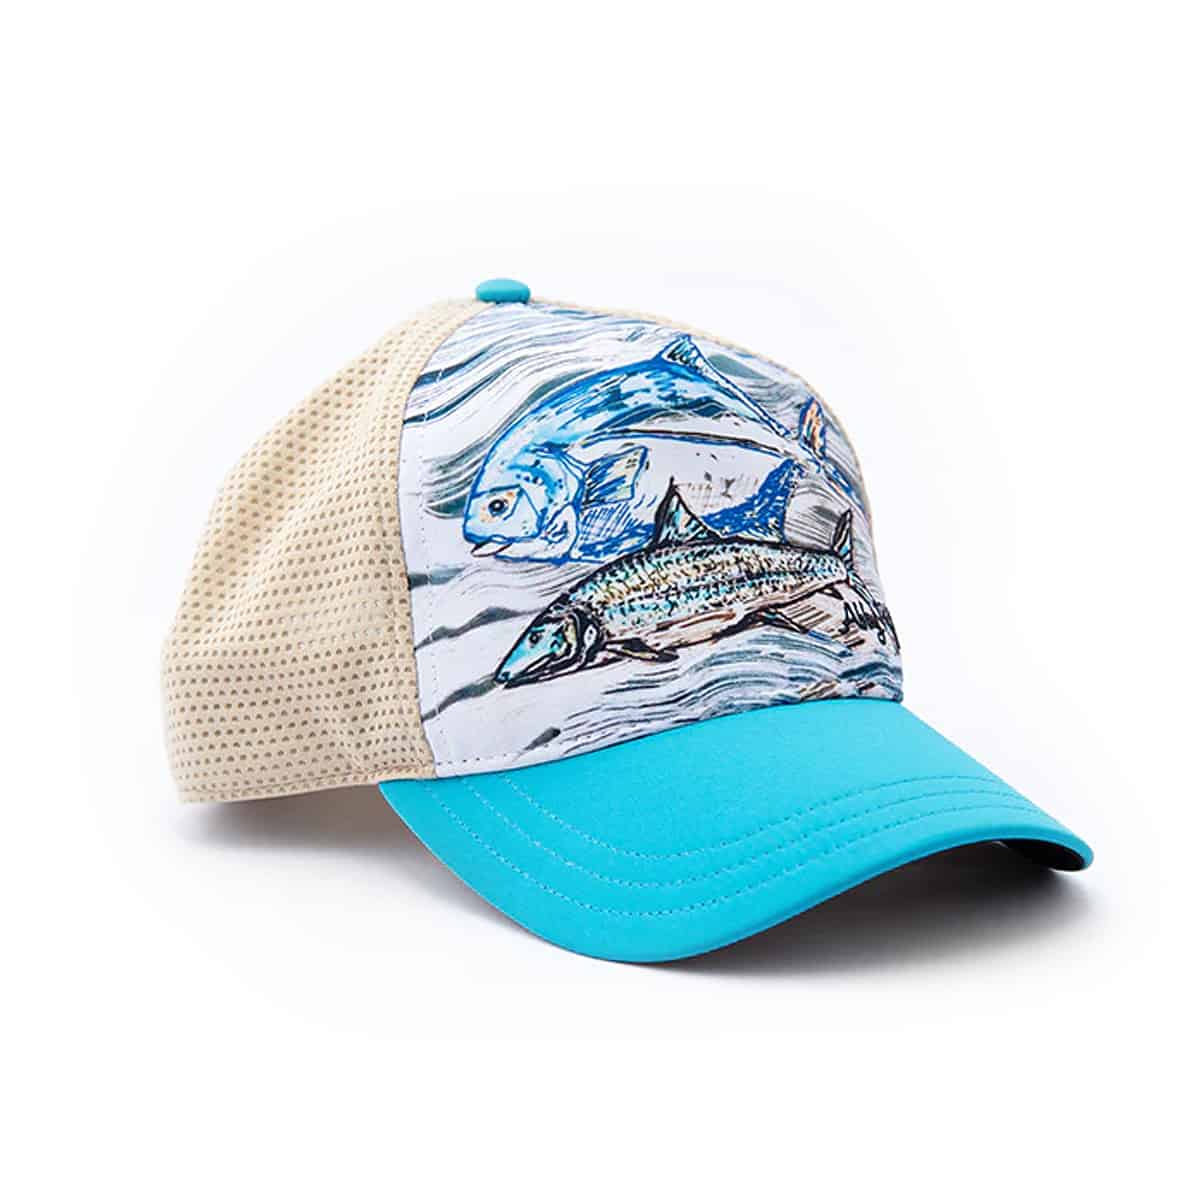 854740008891 art 4 all abby paffrath bone and permit fishing unstructured low profile trucker hat three quarter